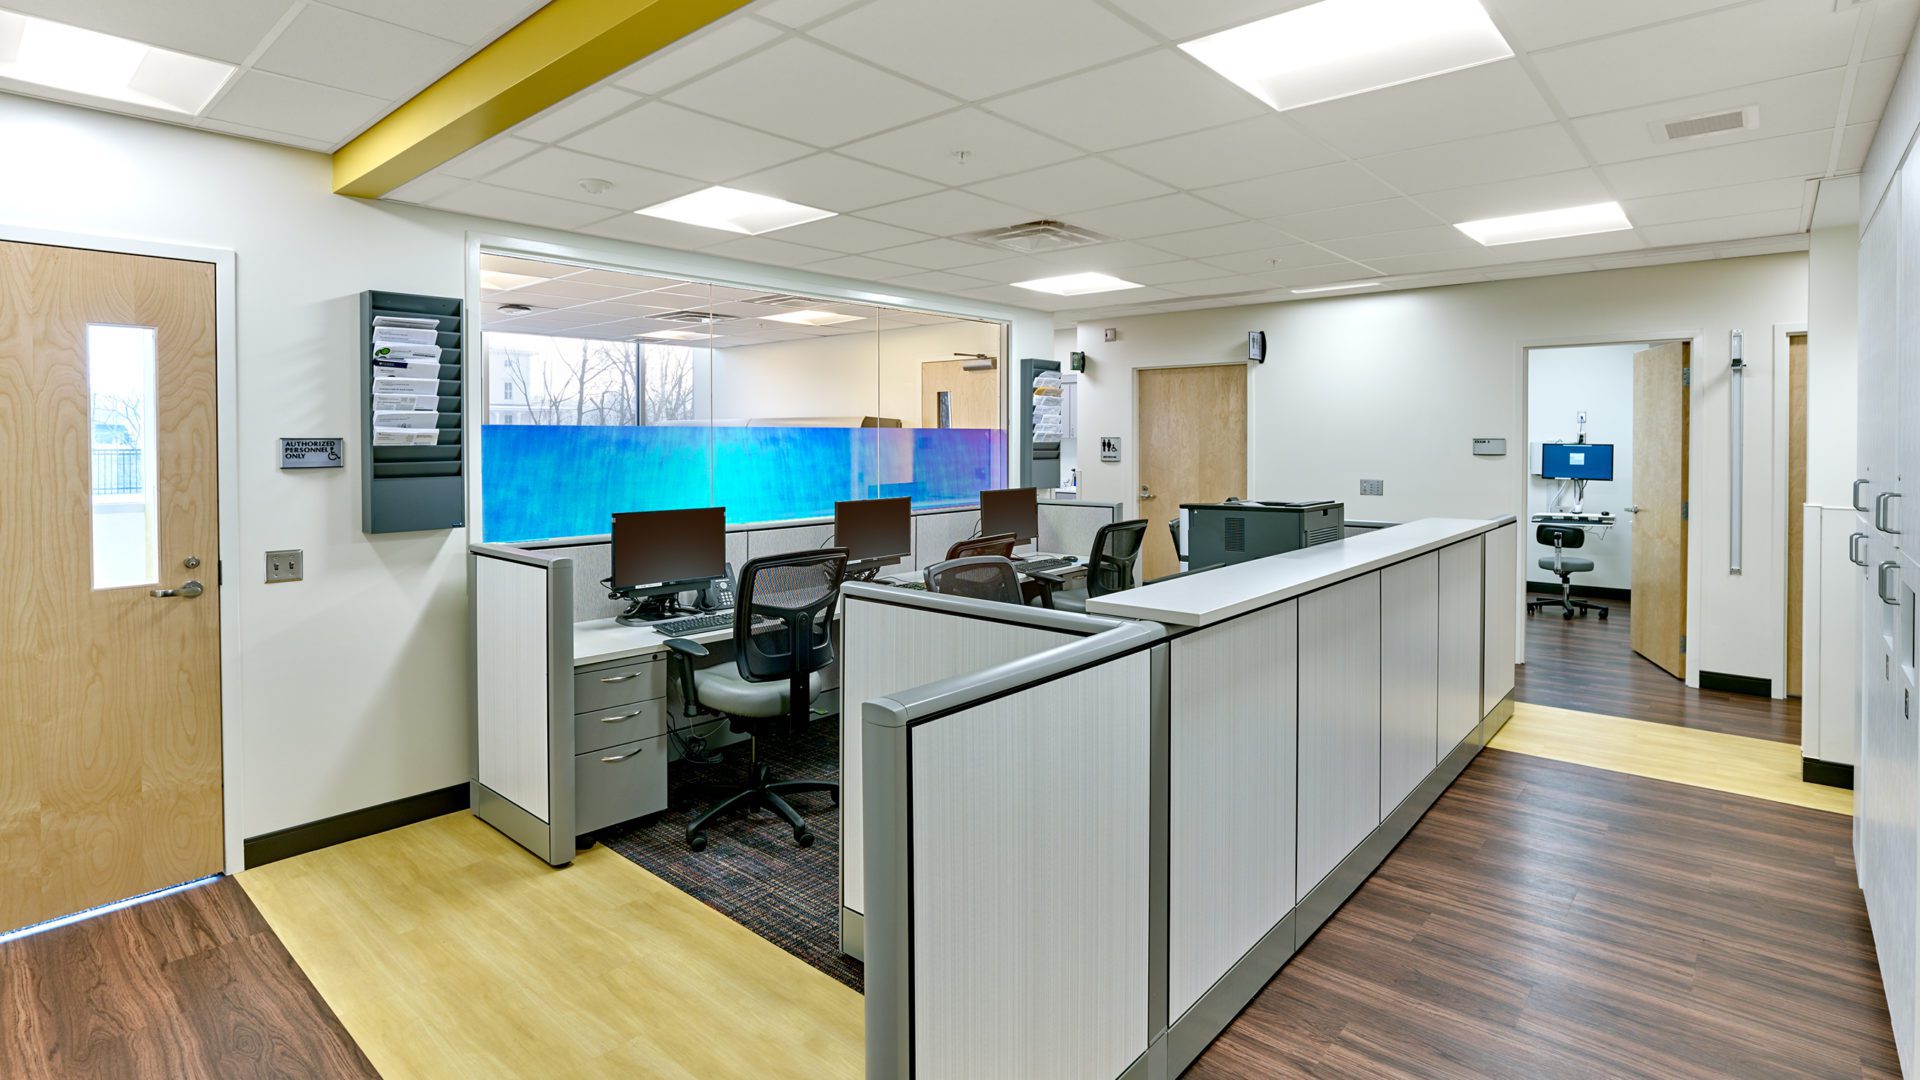 Roseville Staff Desks and Cubicles. bright with yellow and light wood accents